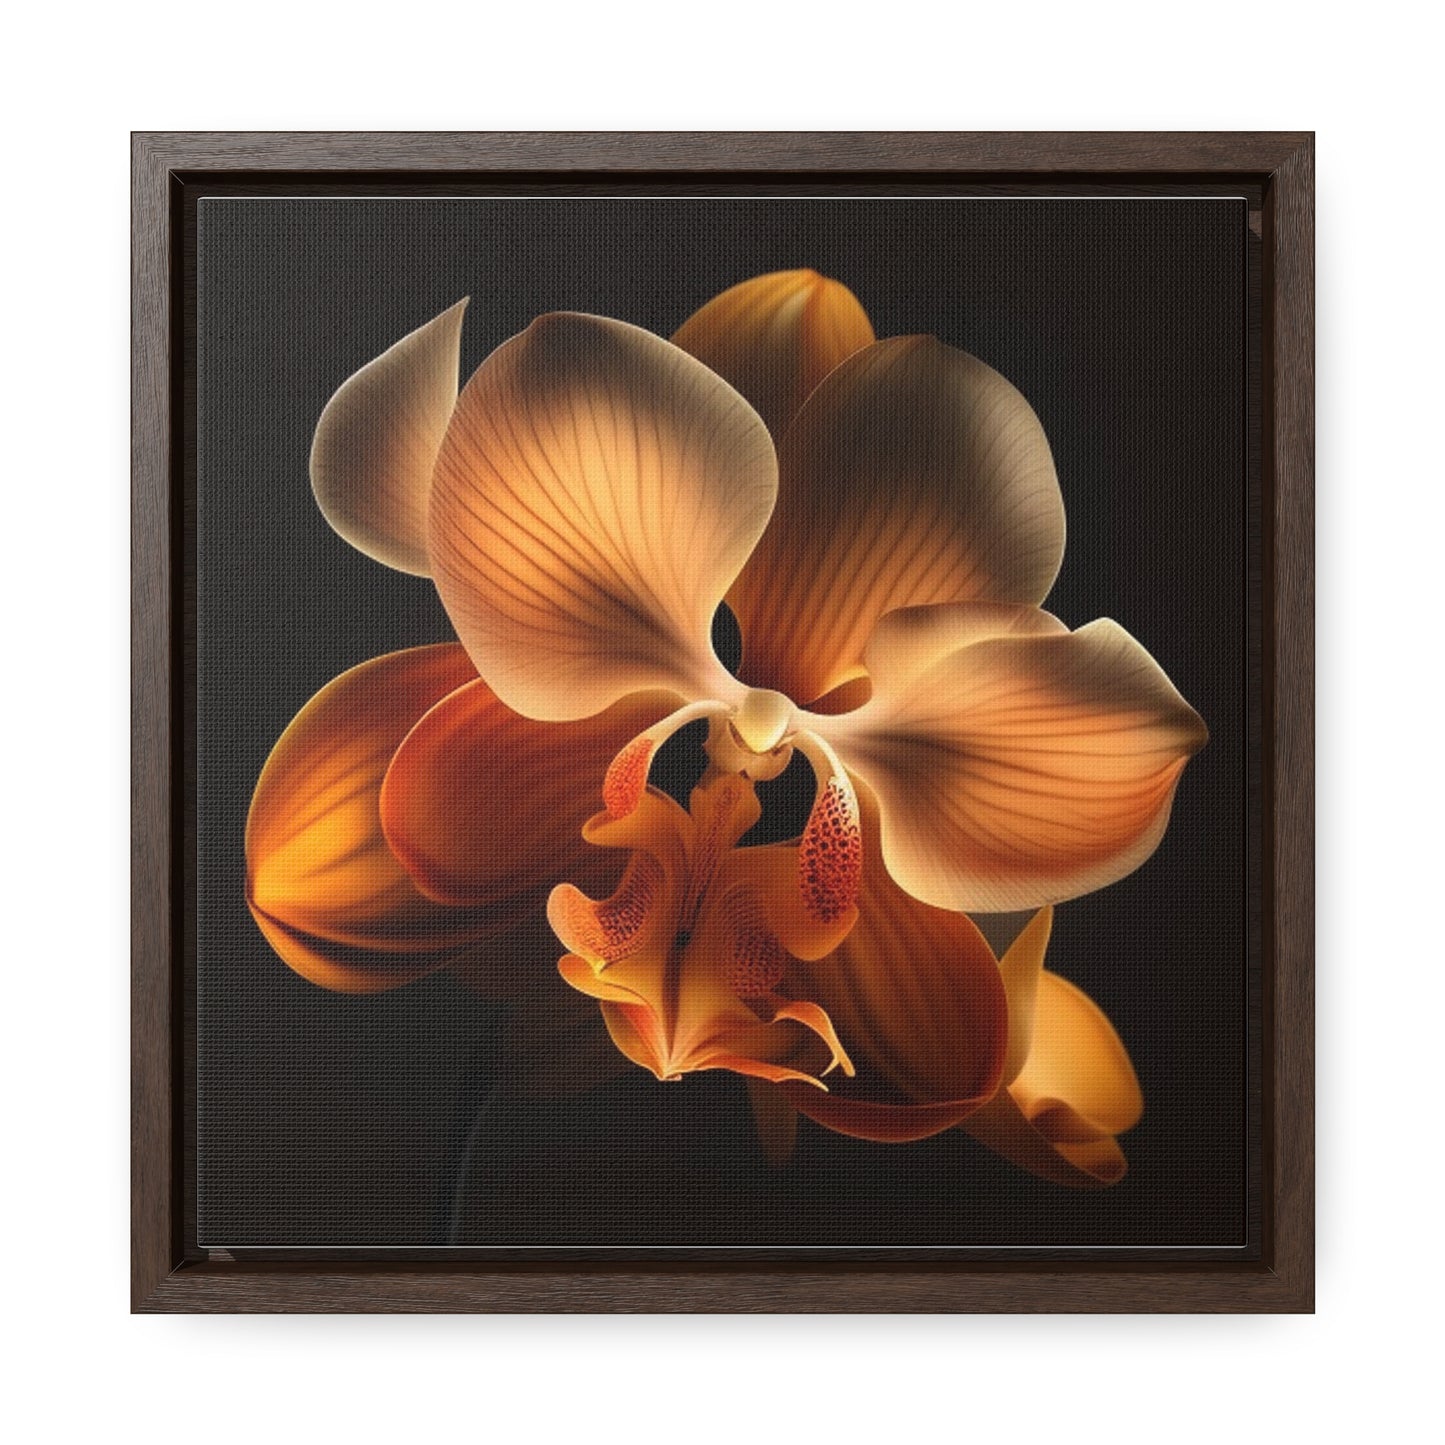 Gallery Canvas Wraps, Square Frame Orange Orchid 2